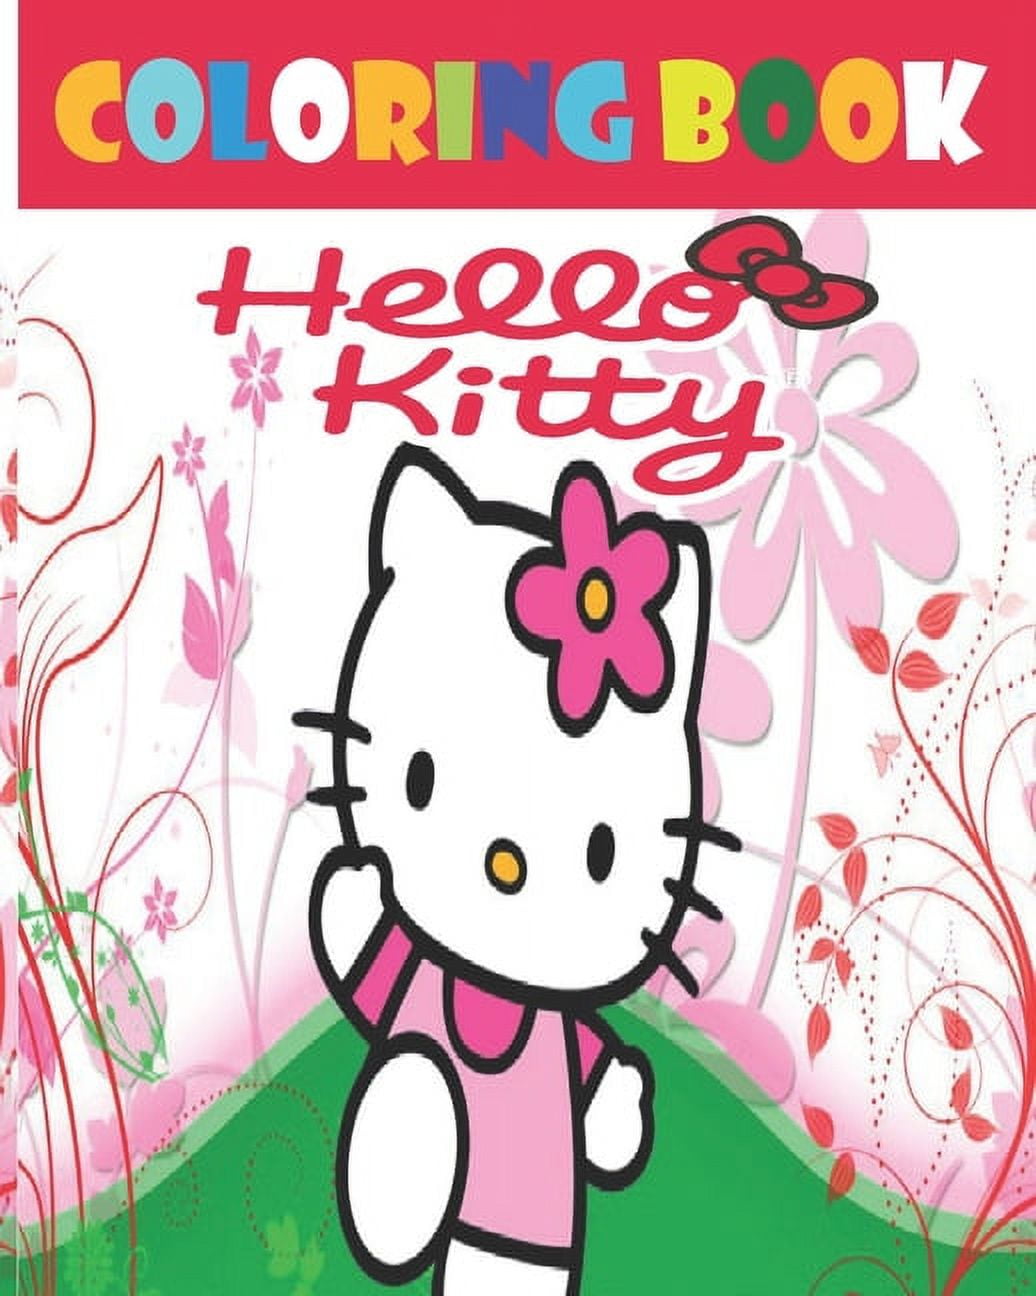 VIZ on X: Announcement: Hello Kitty Official Coloring Book. Say hello to  beautiful art and hours of coloring fun for all ages! Out October 2017.   / X